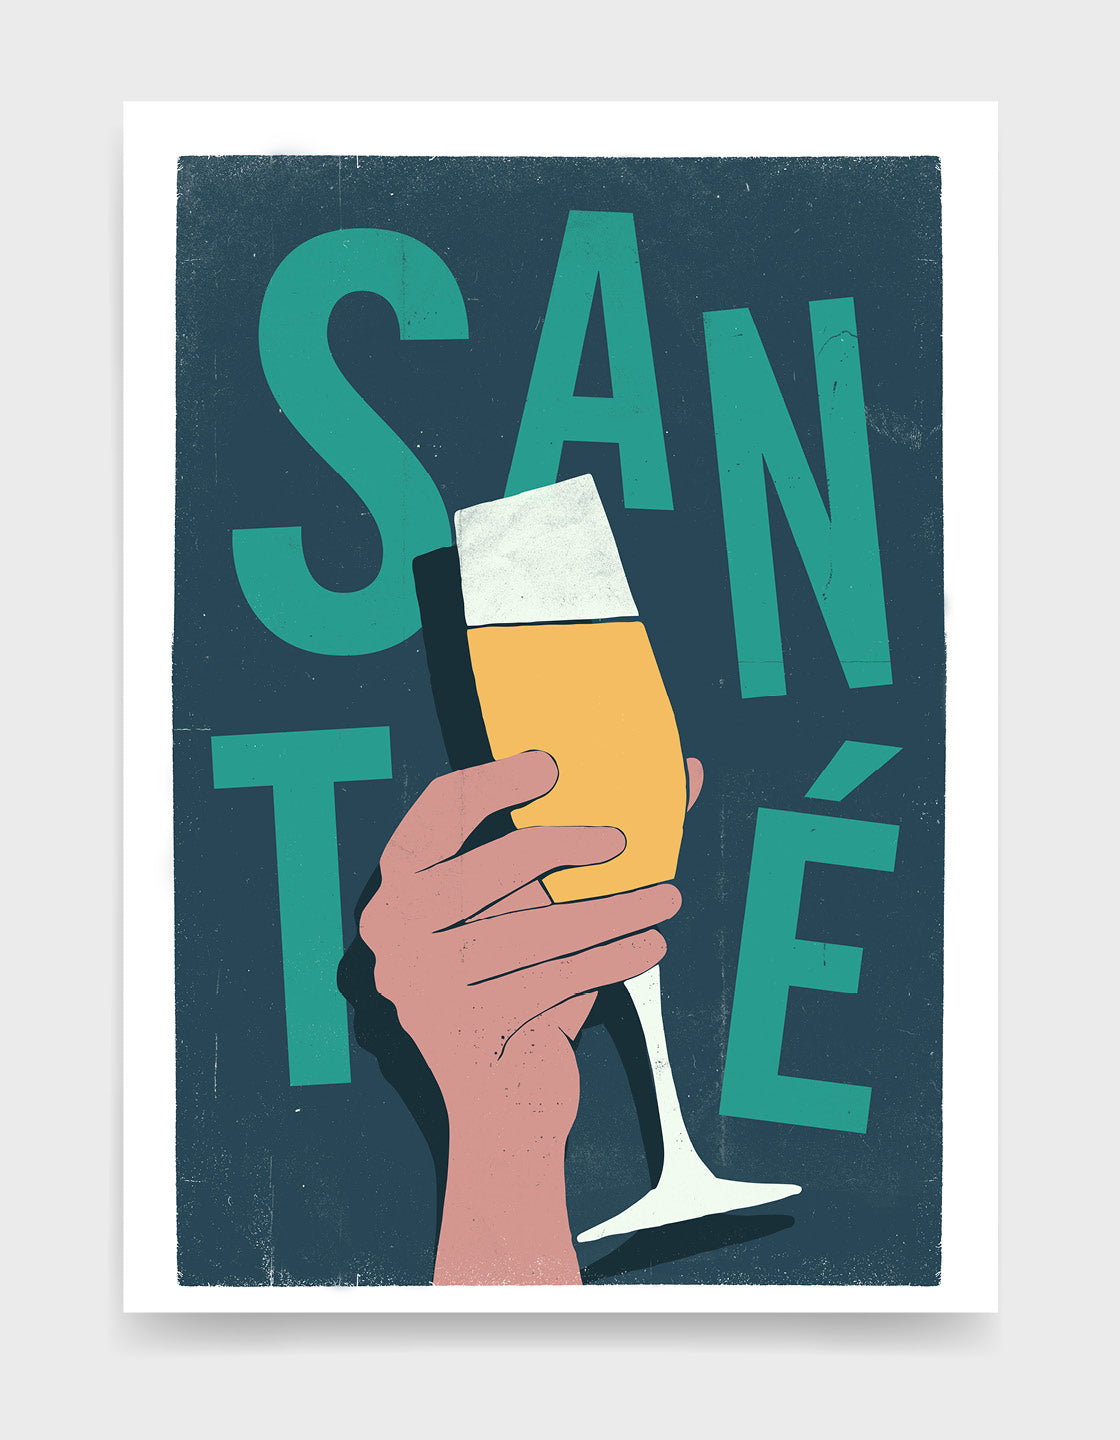 sante typography print with hand holding glass of fizz. text in green against a dark green background